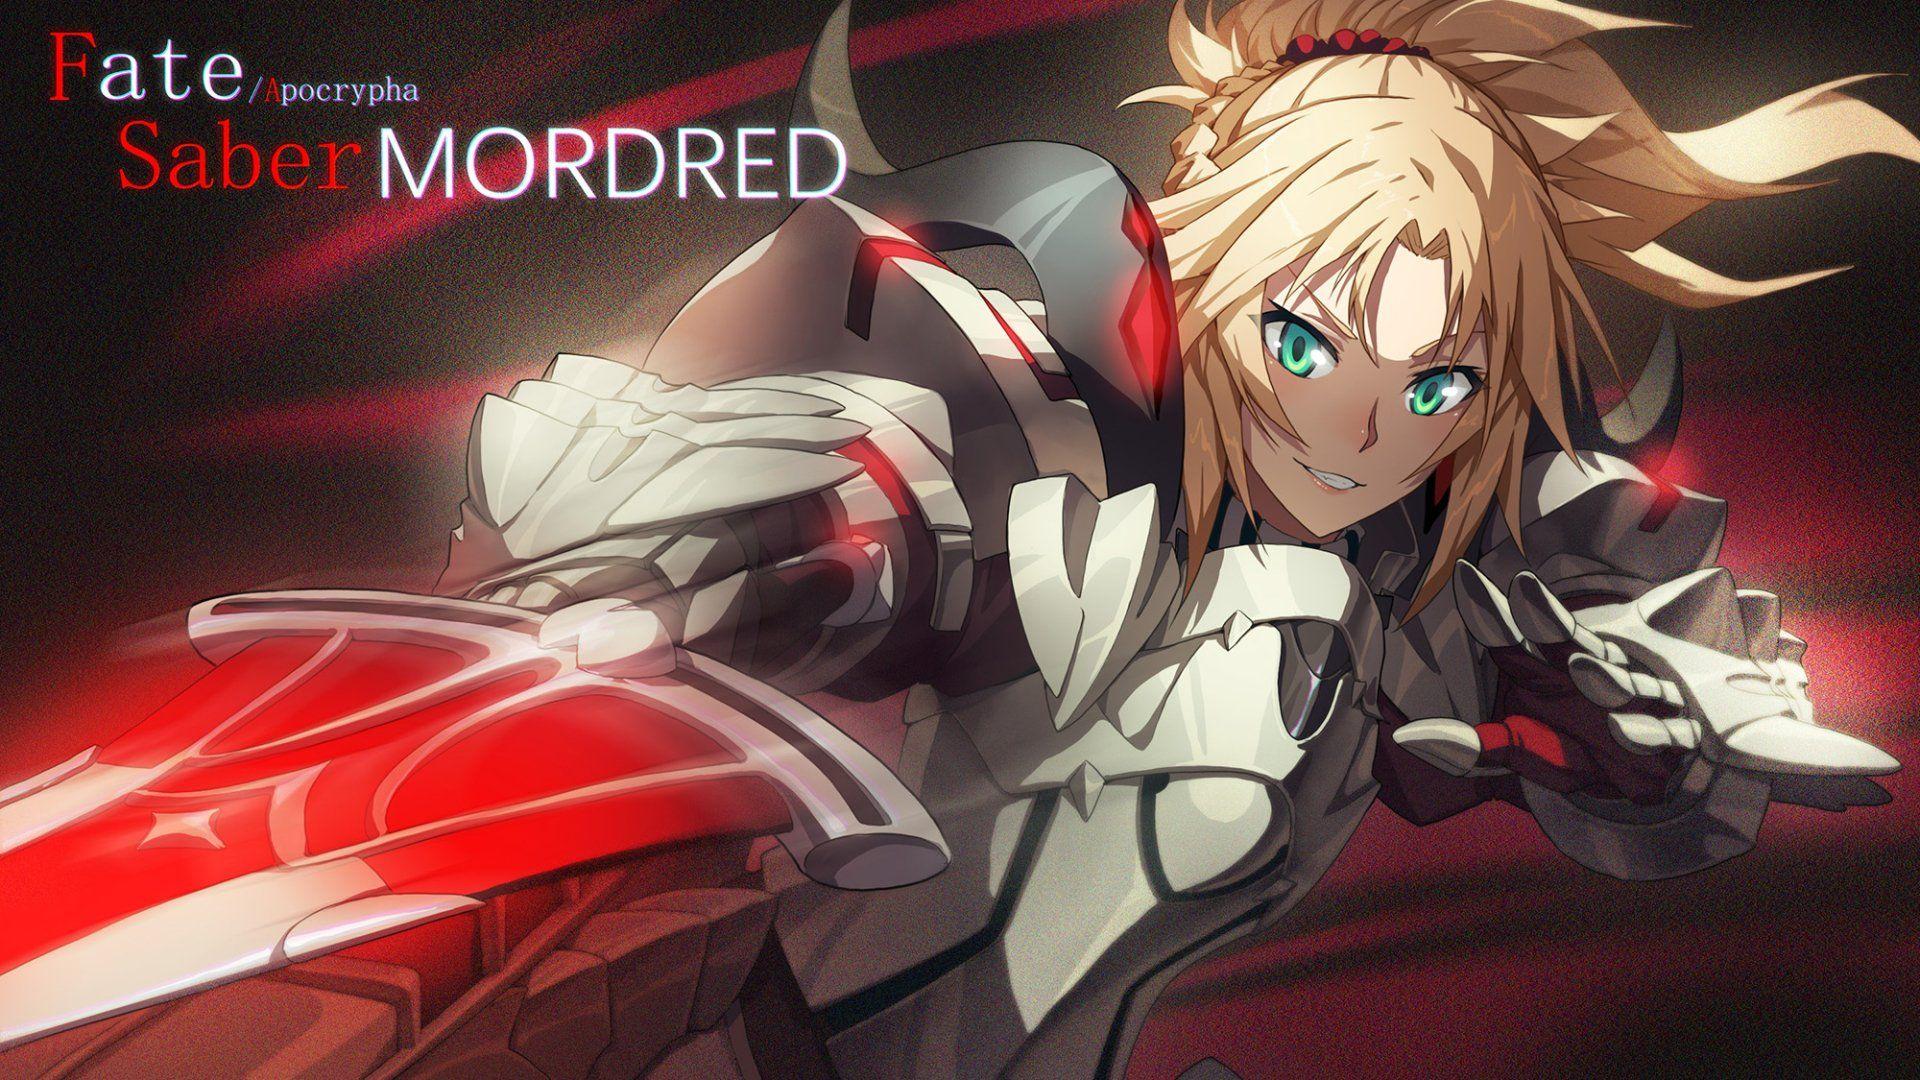 Anime Fate Apocrypha Fate Series Saber Of Red Fate Apocrypha